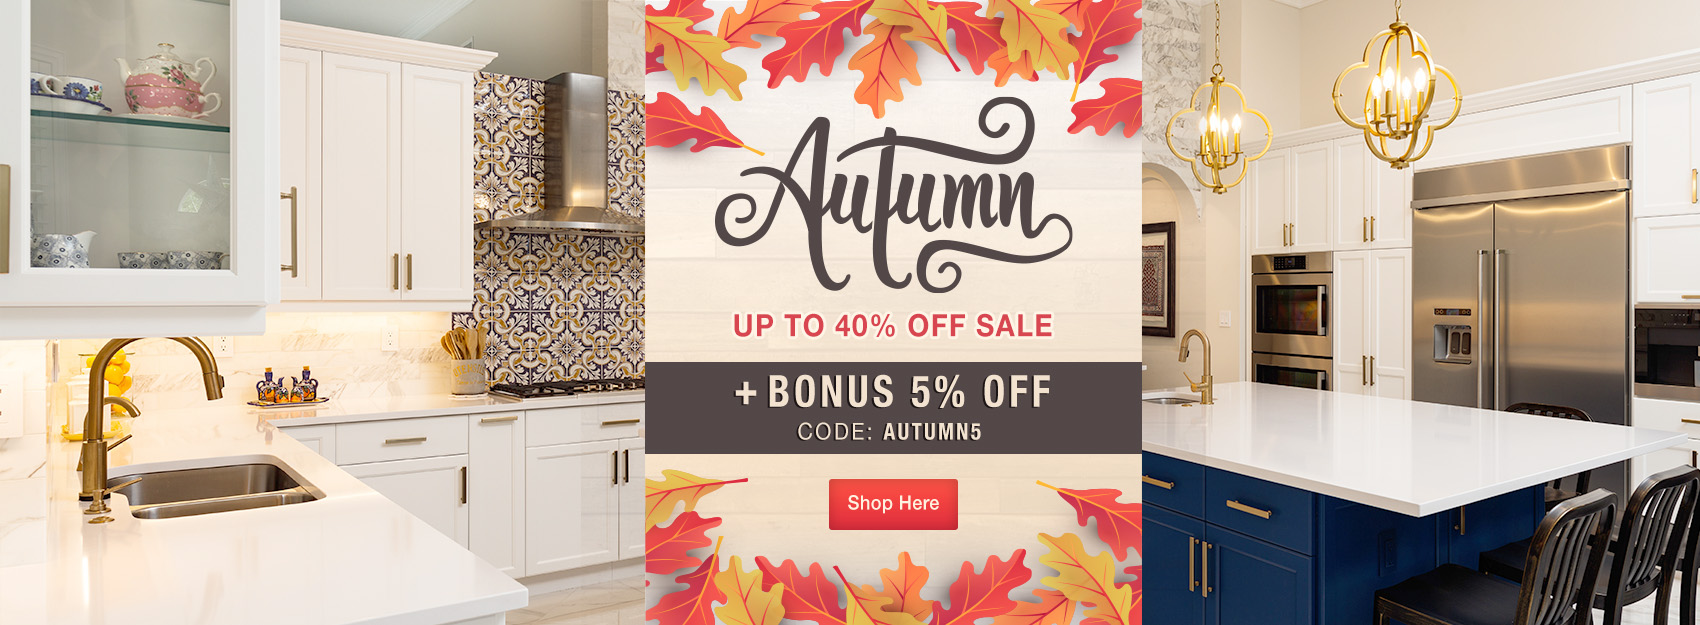 Save up to 25% and take an extra 5% off your entire order as part of the Autumn Sales Event.